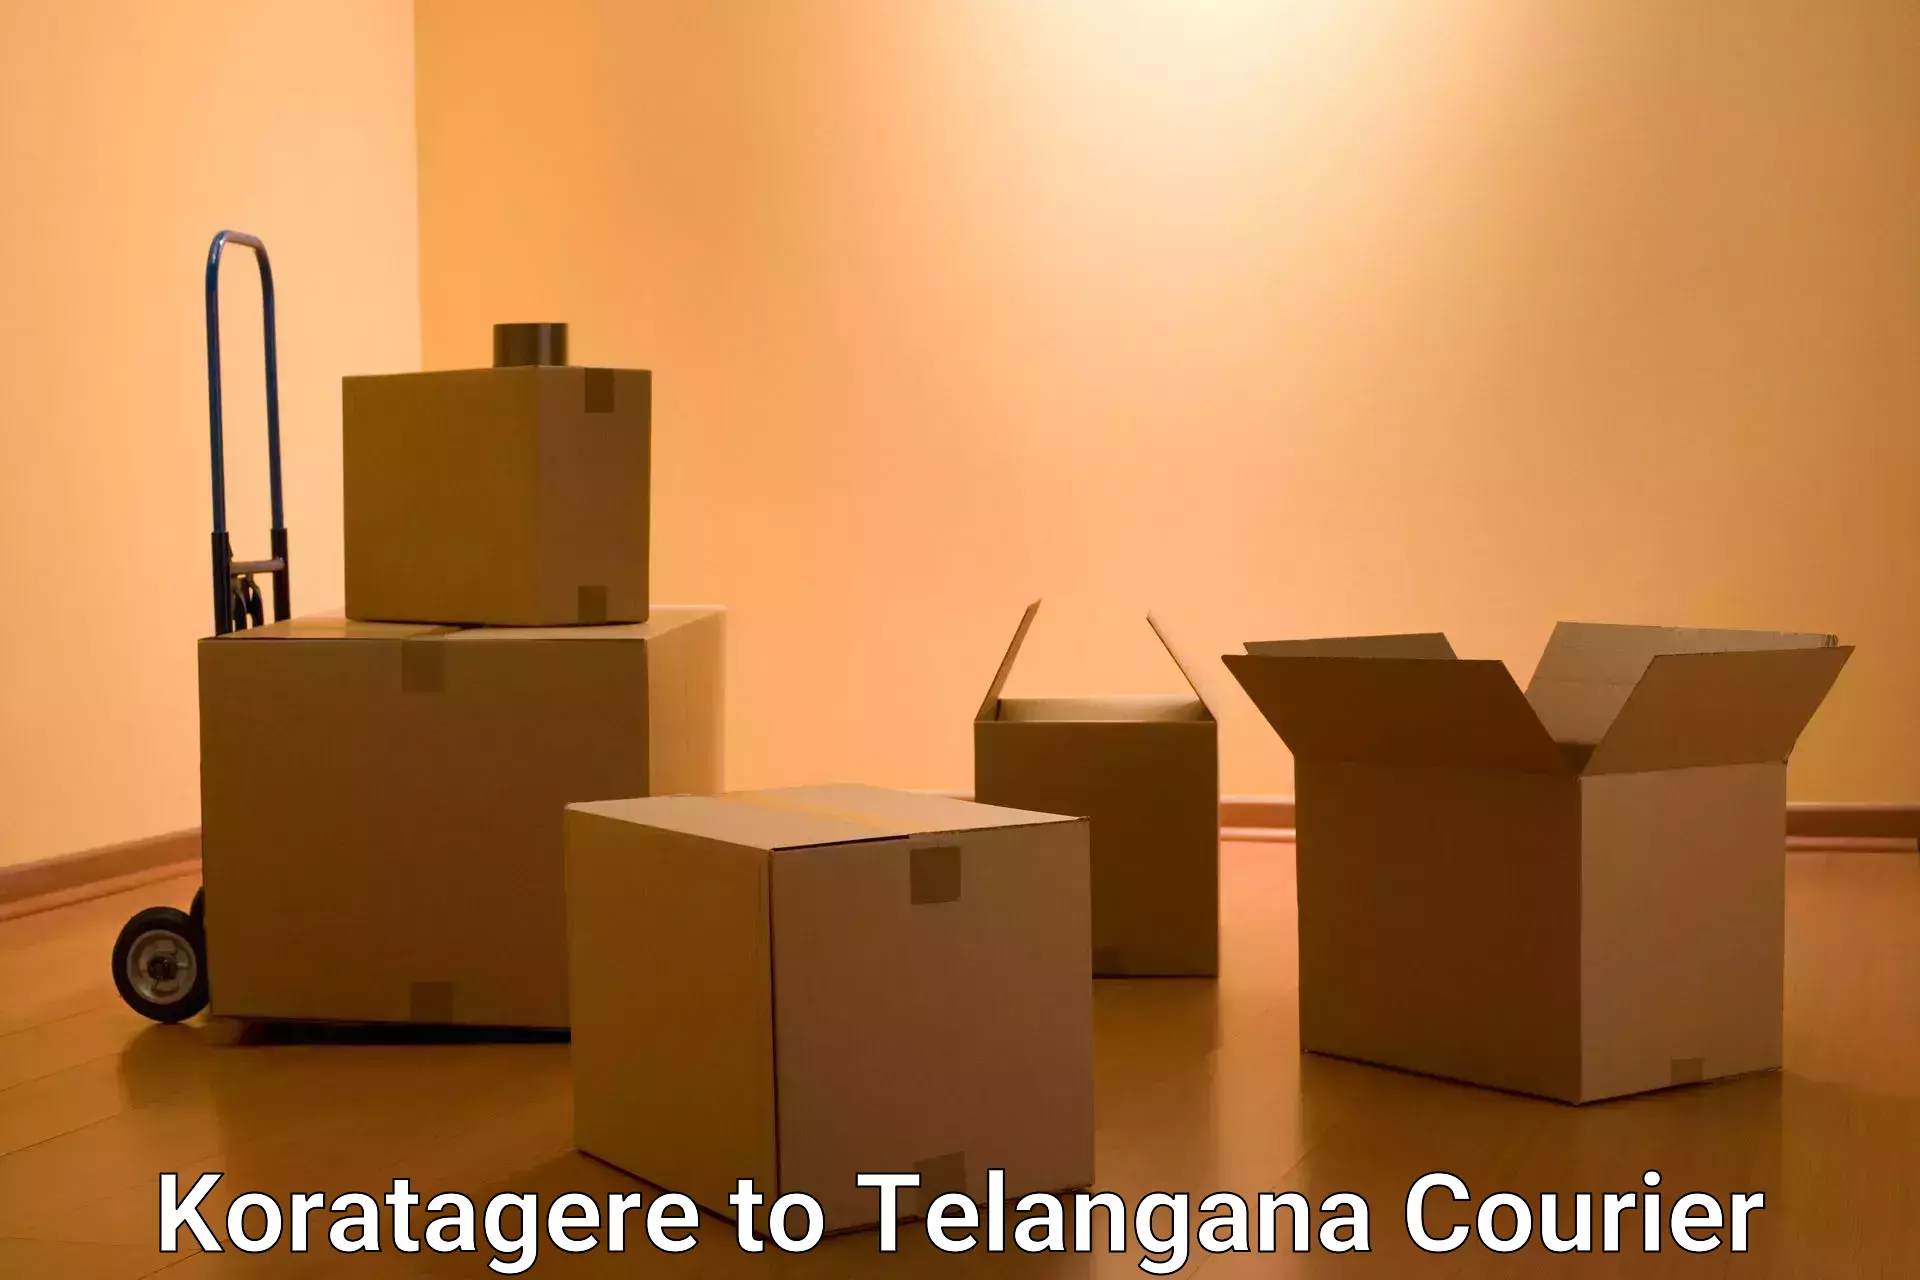 Nationwide parcel services Koratagere to Telangana